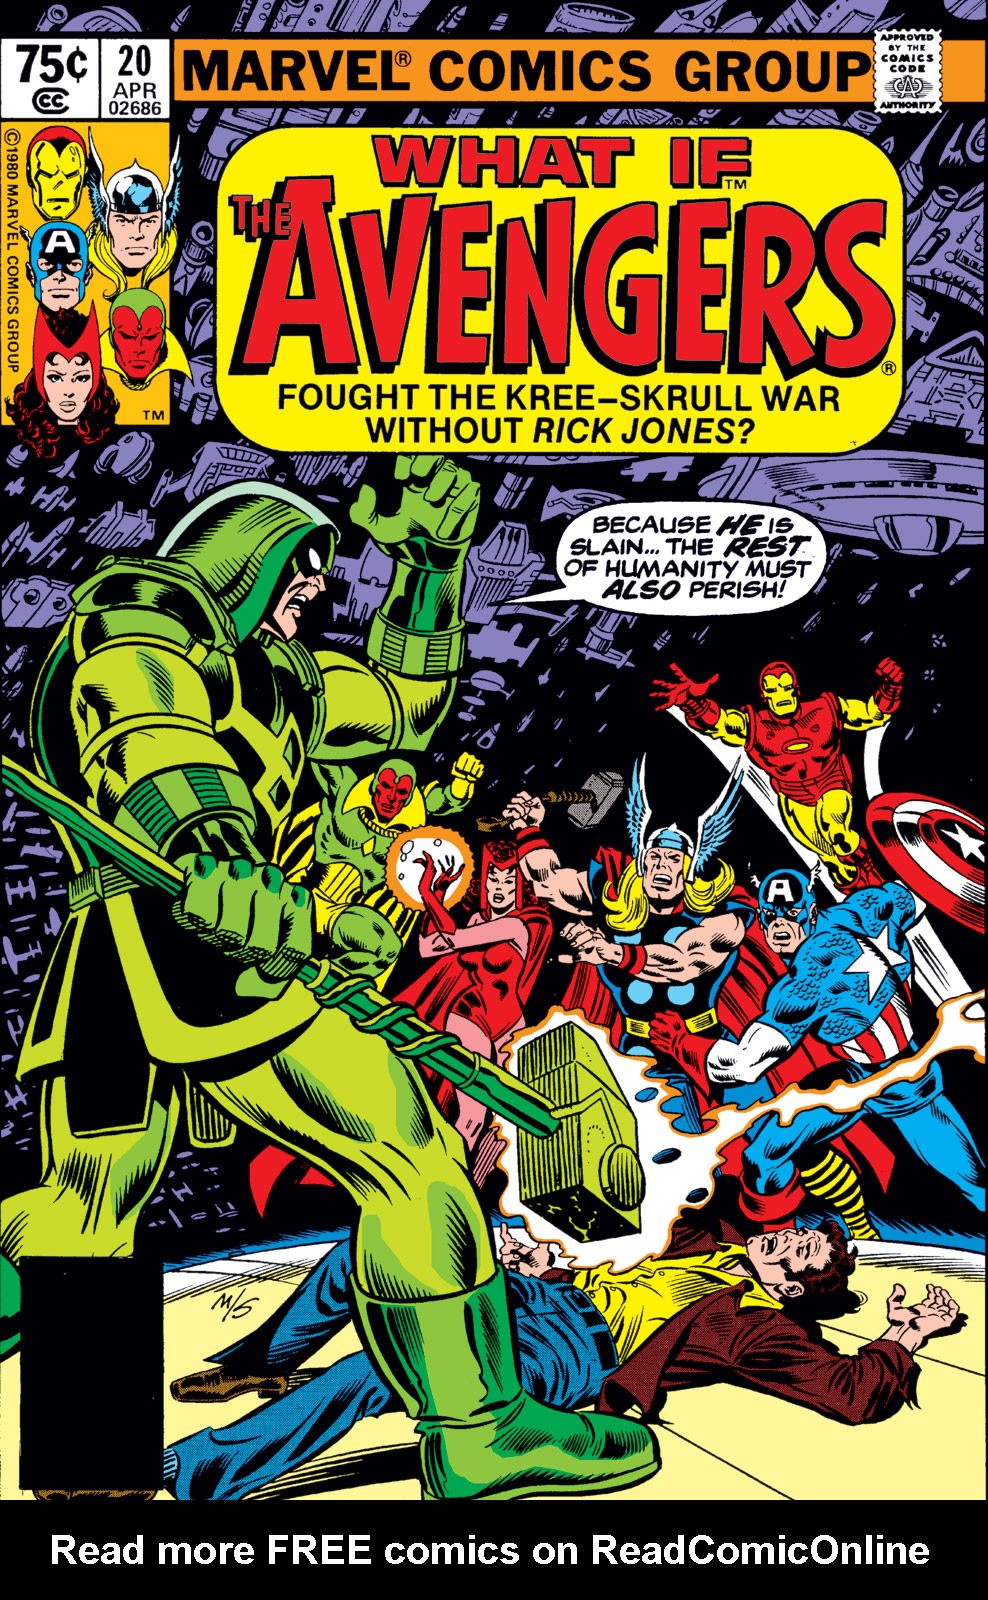 What If? (1977) issue 20 - The Avengers fought the Kree-Skrull war without Rick Jones - Page 1